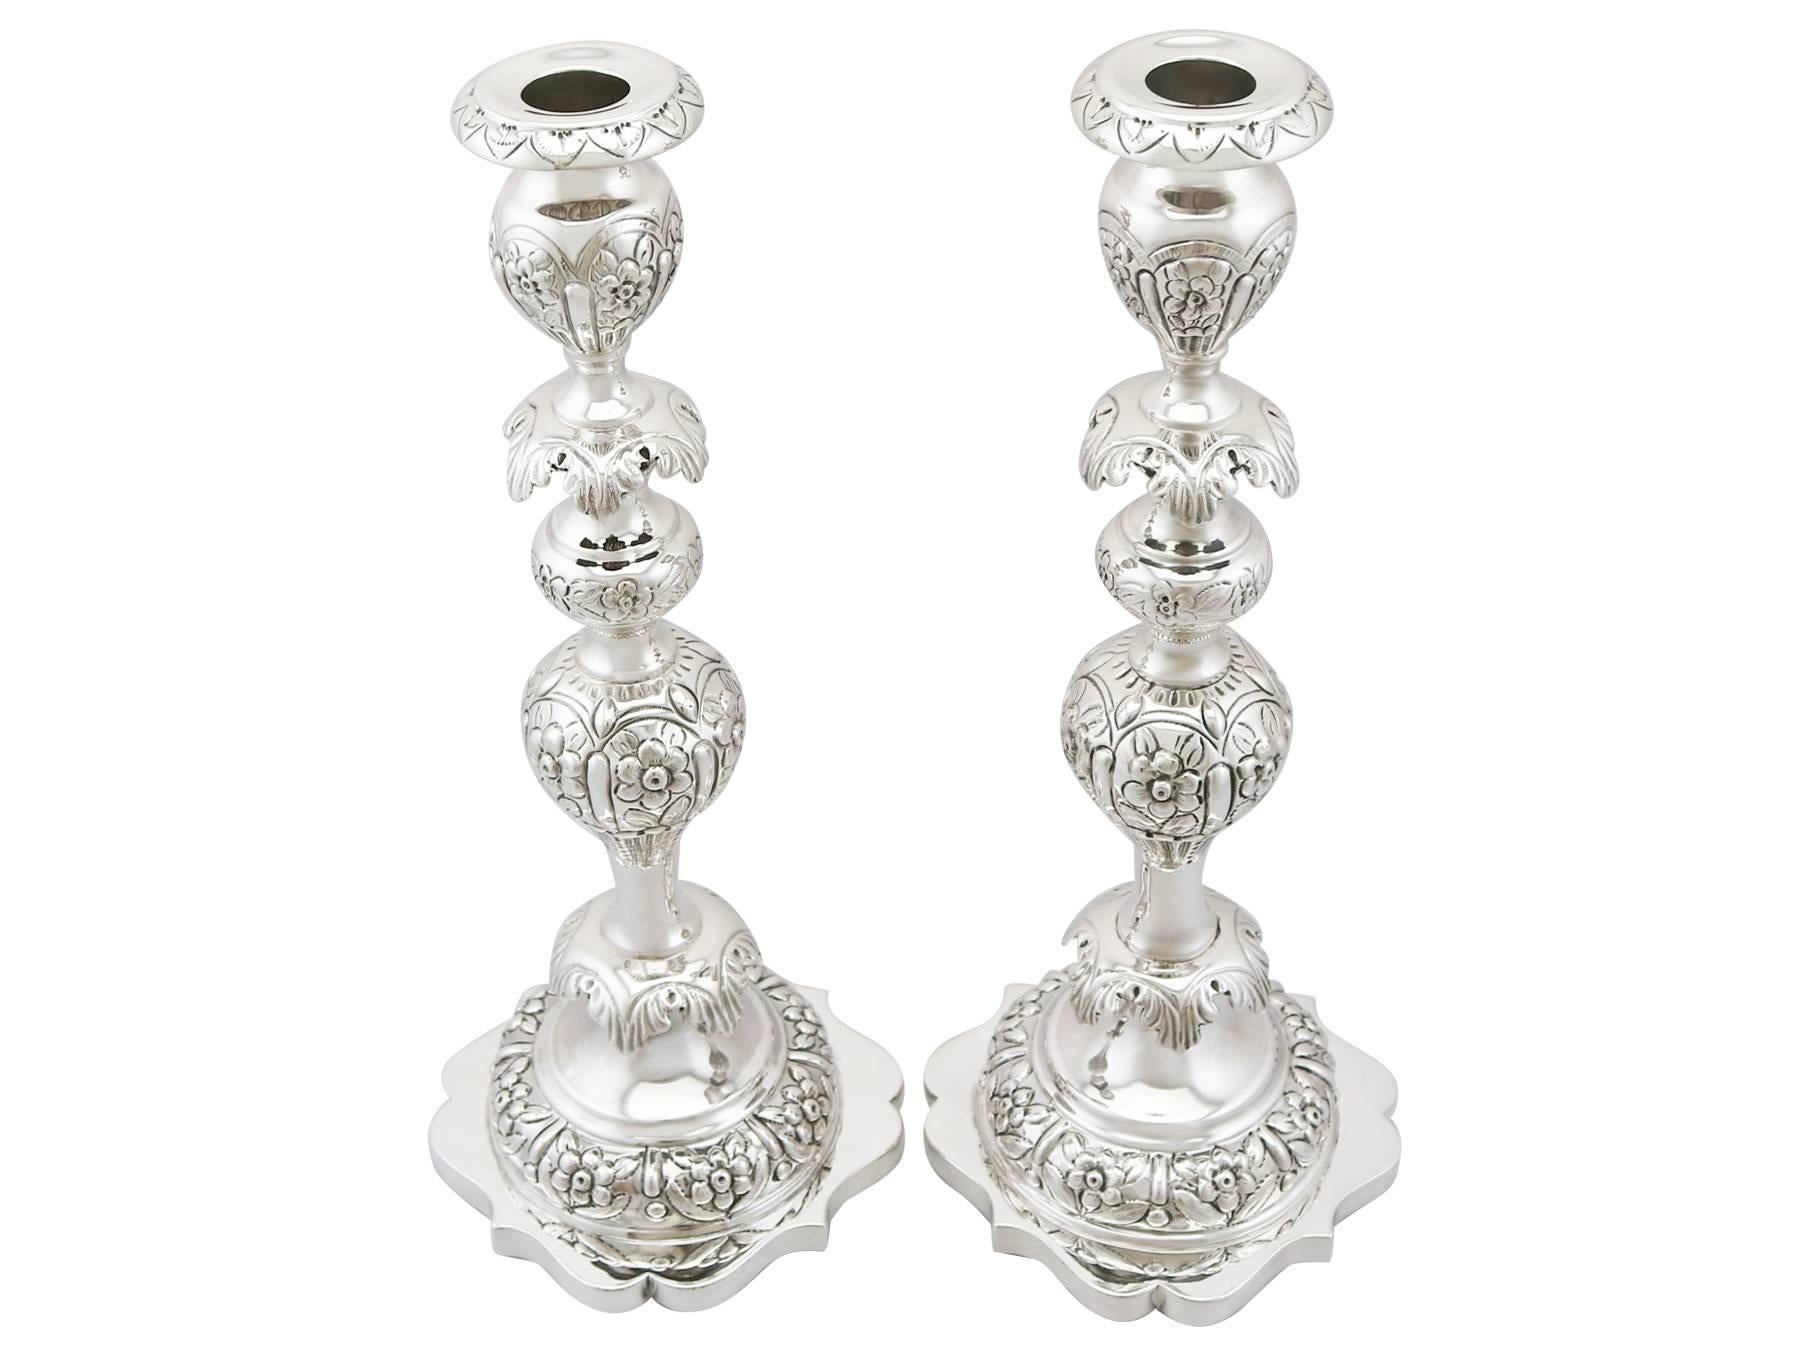 An exceptional, fine and impressive pair of antique Edwardian English sterling silver Shabbat candlesticks; an addition to our ornamental silverware collection.

These exceptional antique silver Shabbat candlesticks, in sterling standard, have a